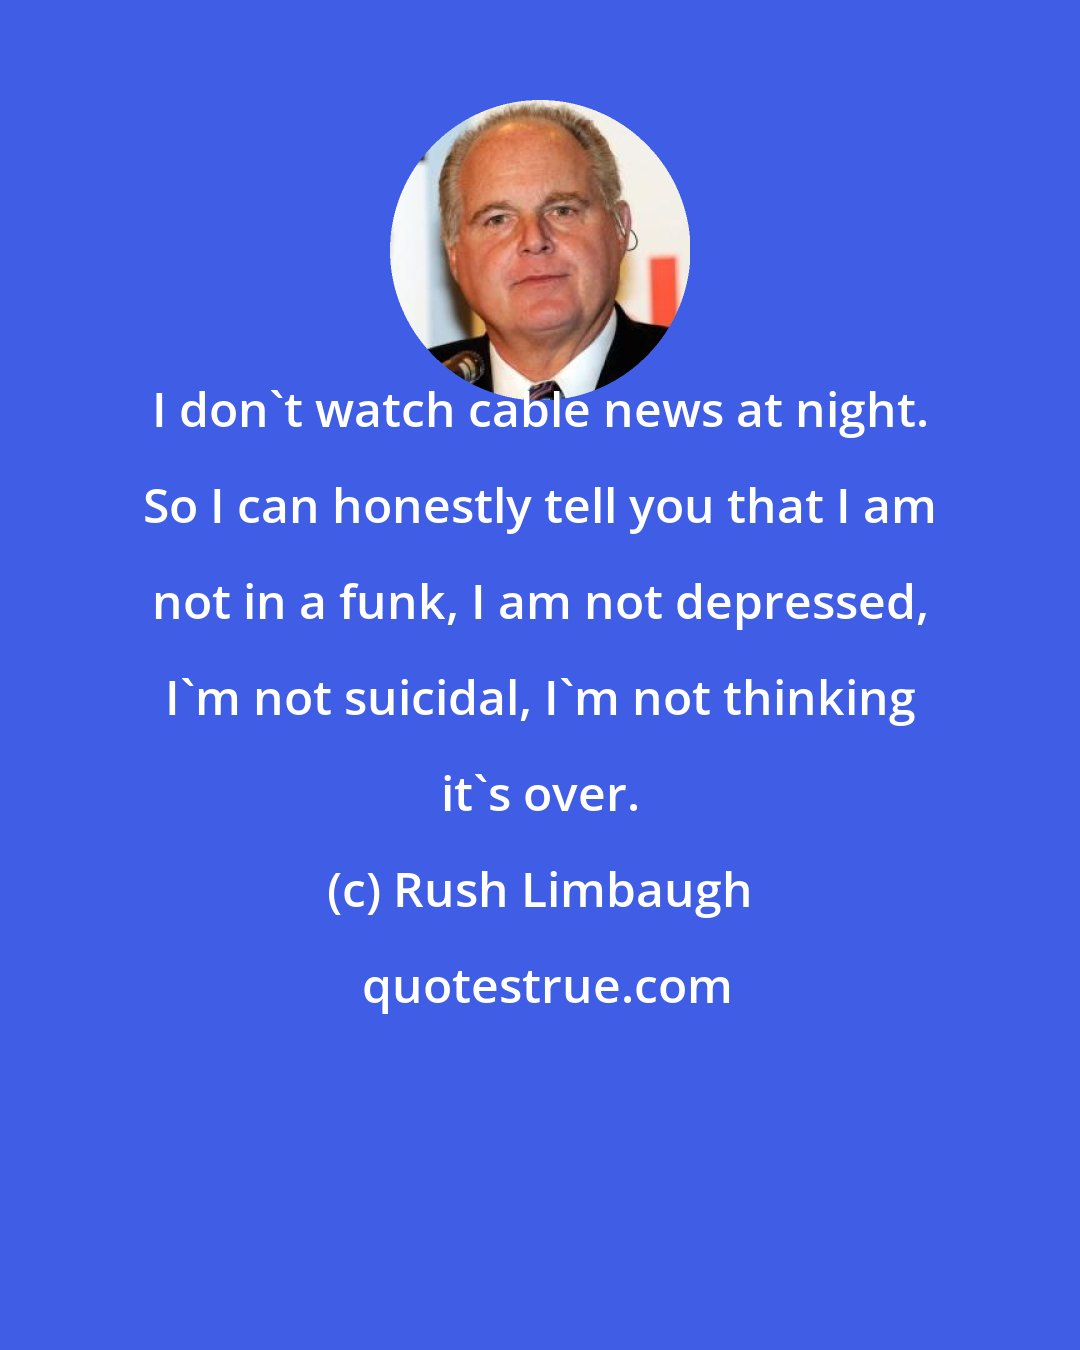 Rush Limbaugh: I don't watch cable news at night. So I can honestly tell you that I am not in a funk, I am not depressed, I'm not suicidal, I'm not thinking it's over.